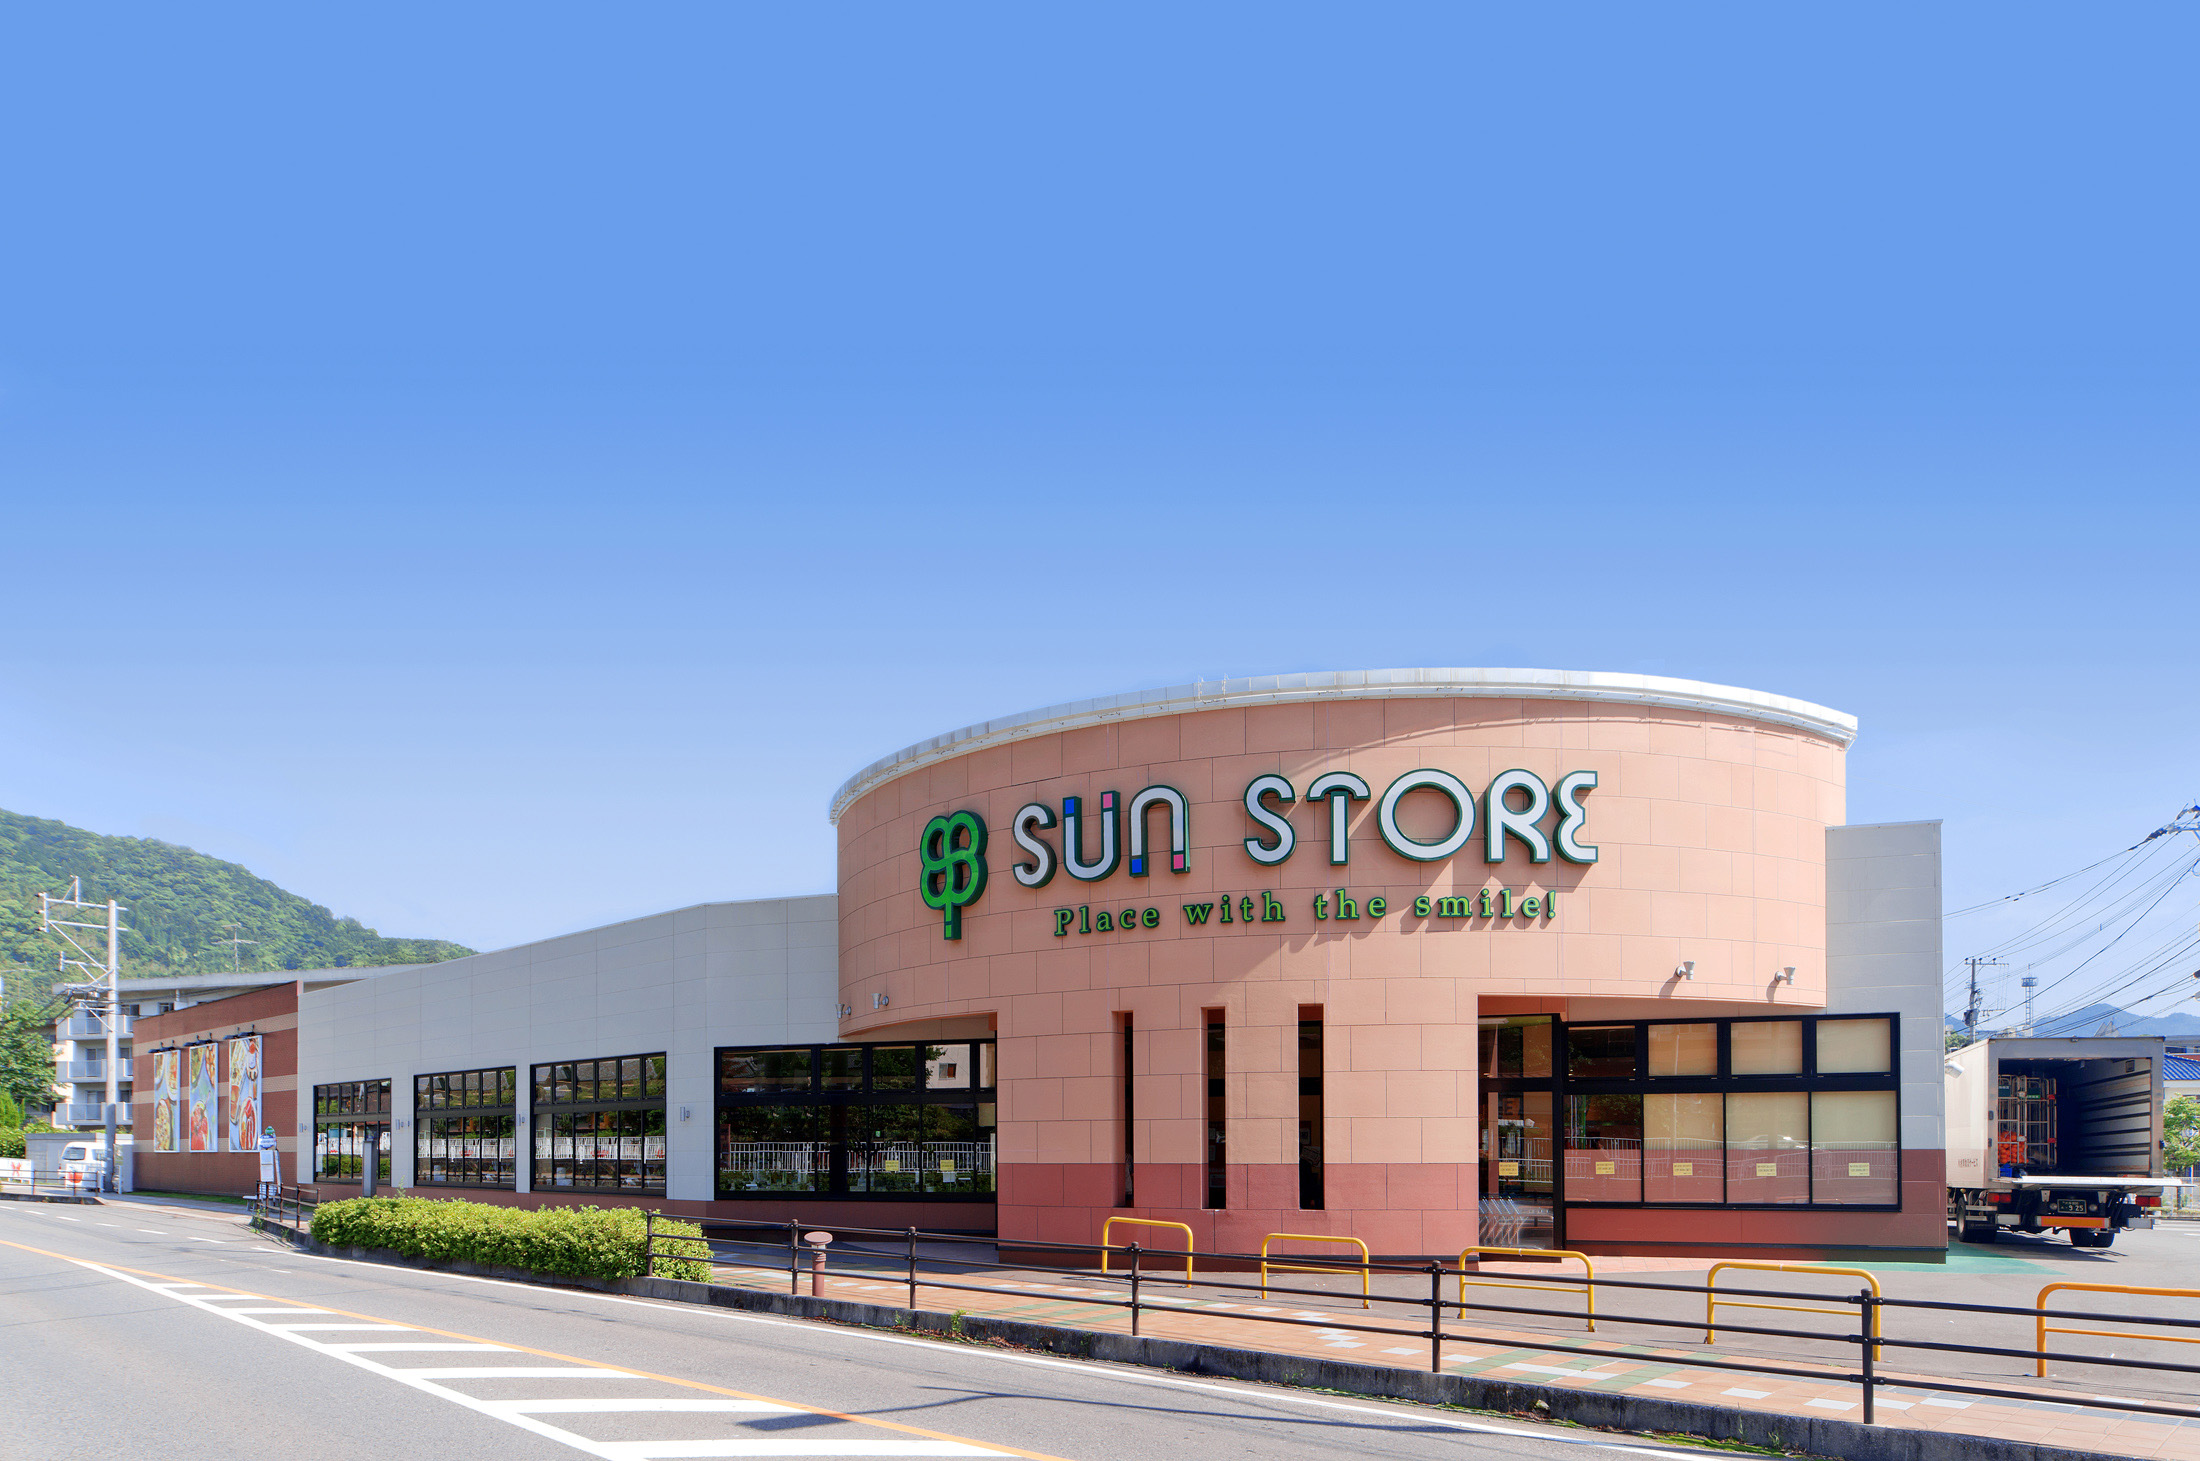 Sun Store(Grocery shop)